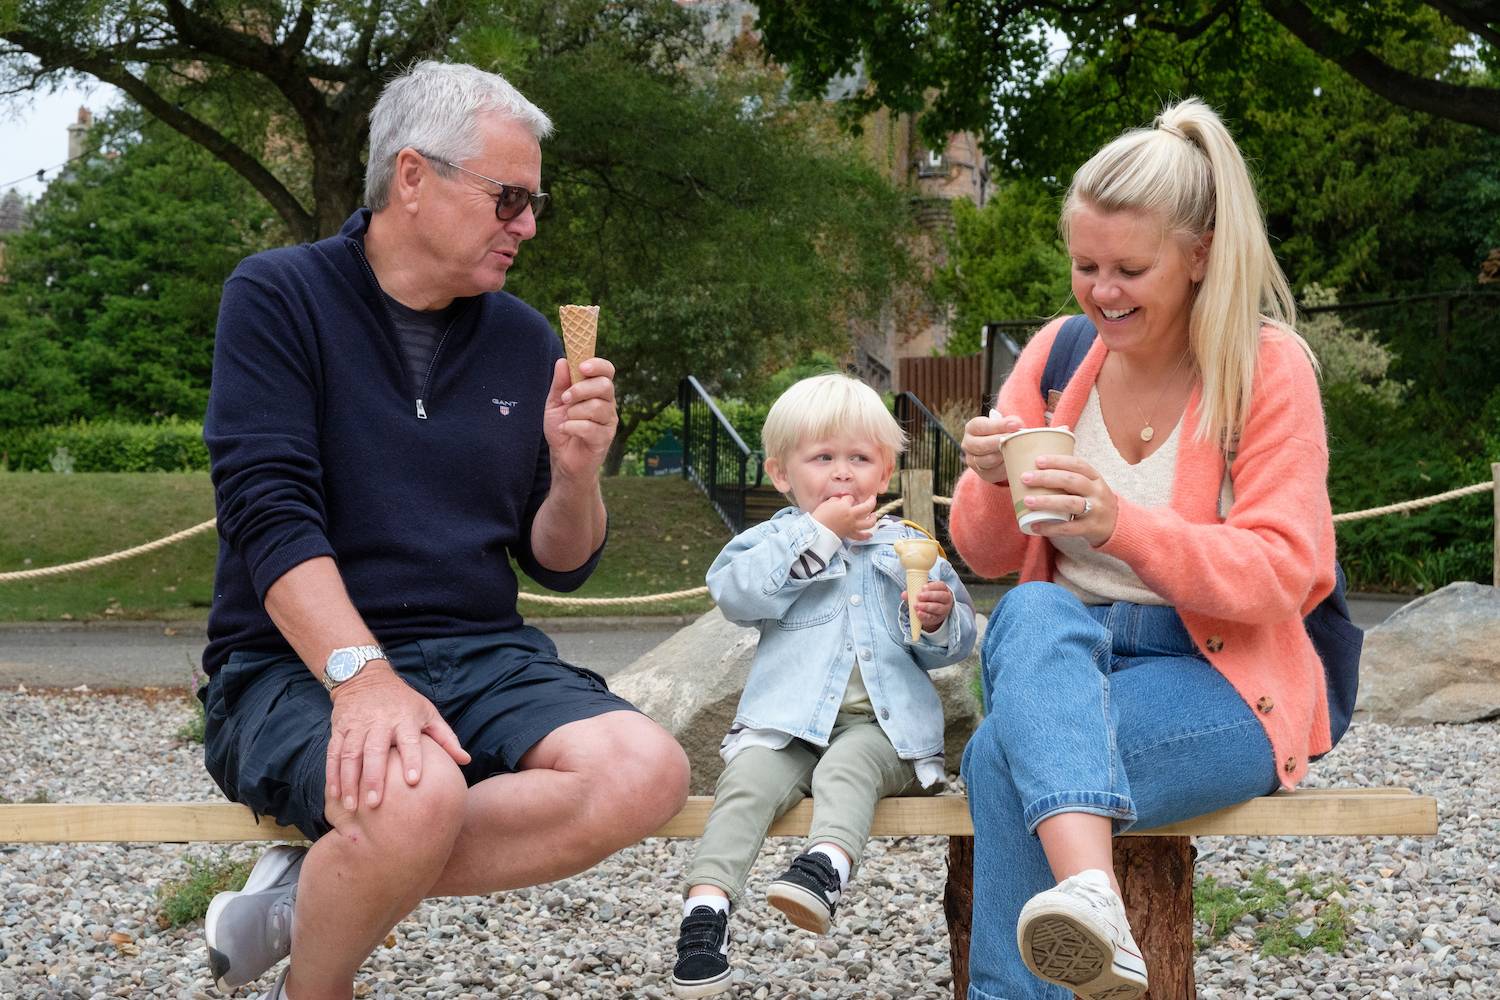 Edinburgh Zoo visitors family with young kid (boy) sitting on bench by marquee with ice cream. IMAGE: Robin Mair 2022